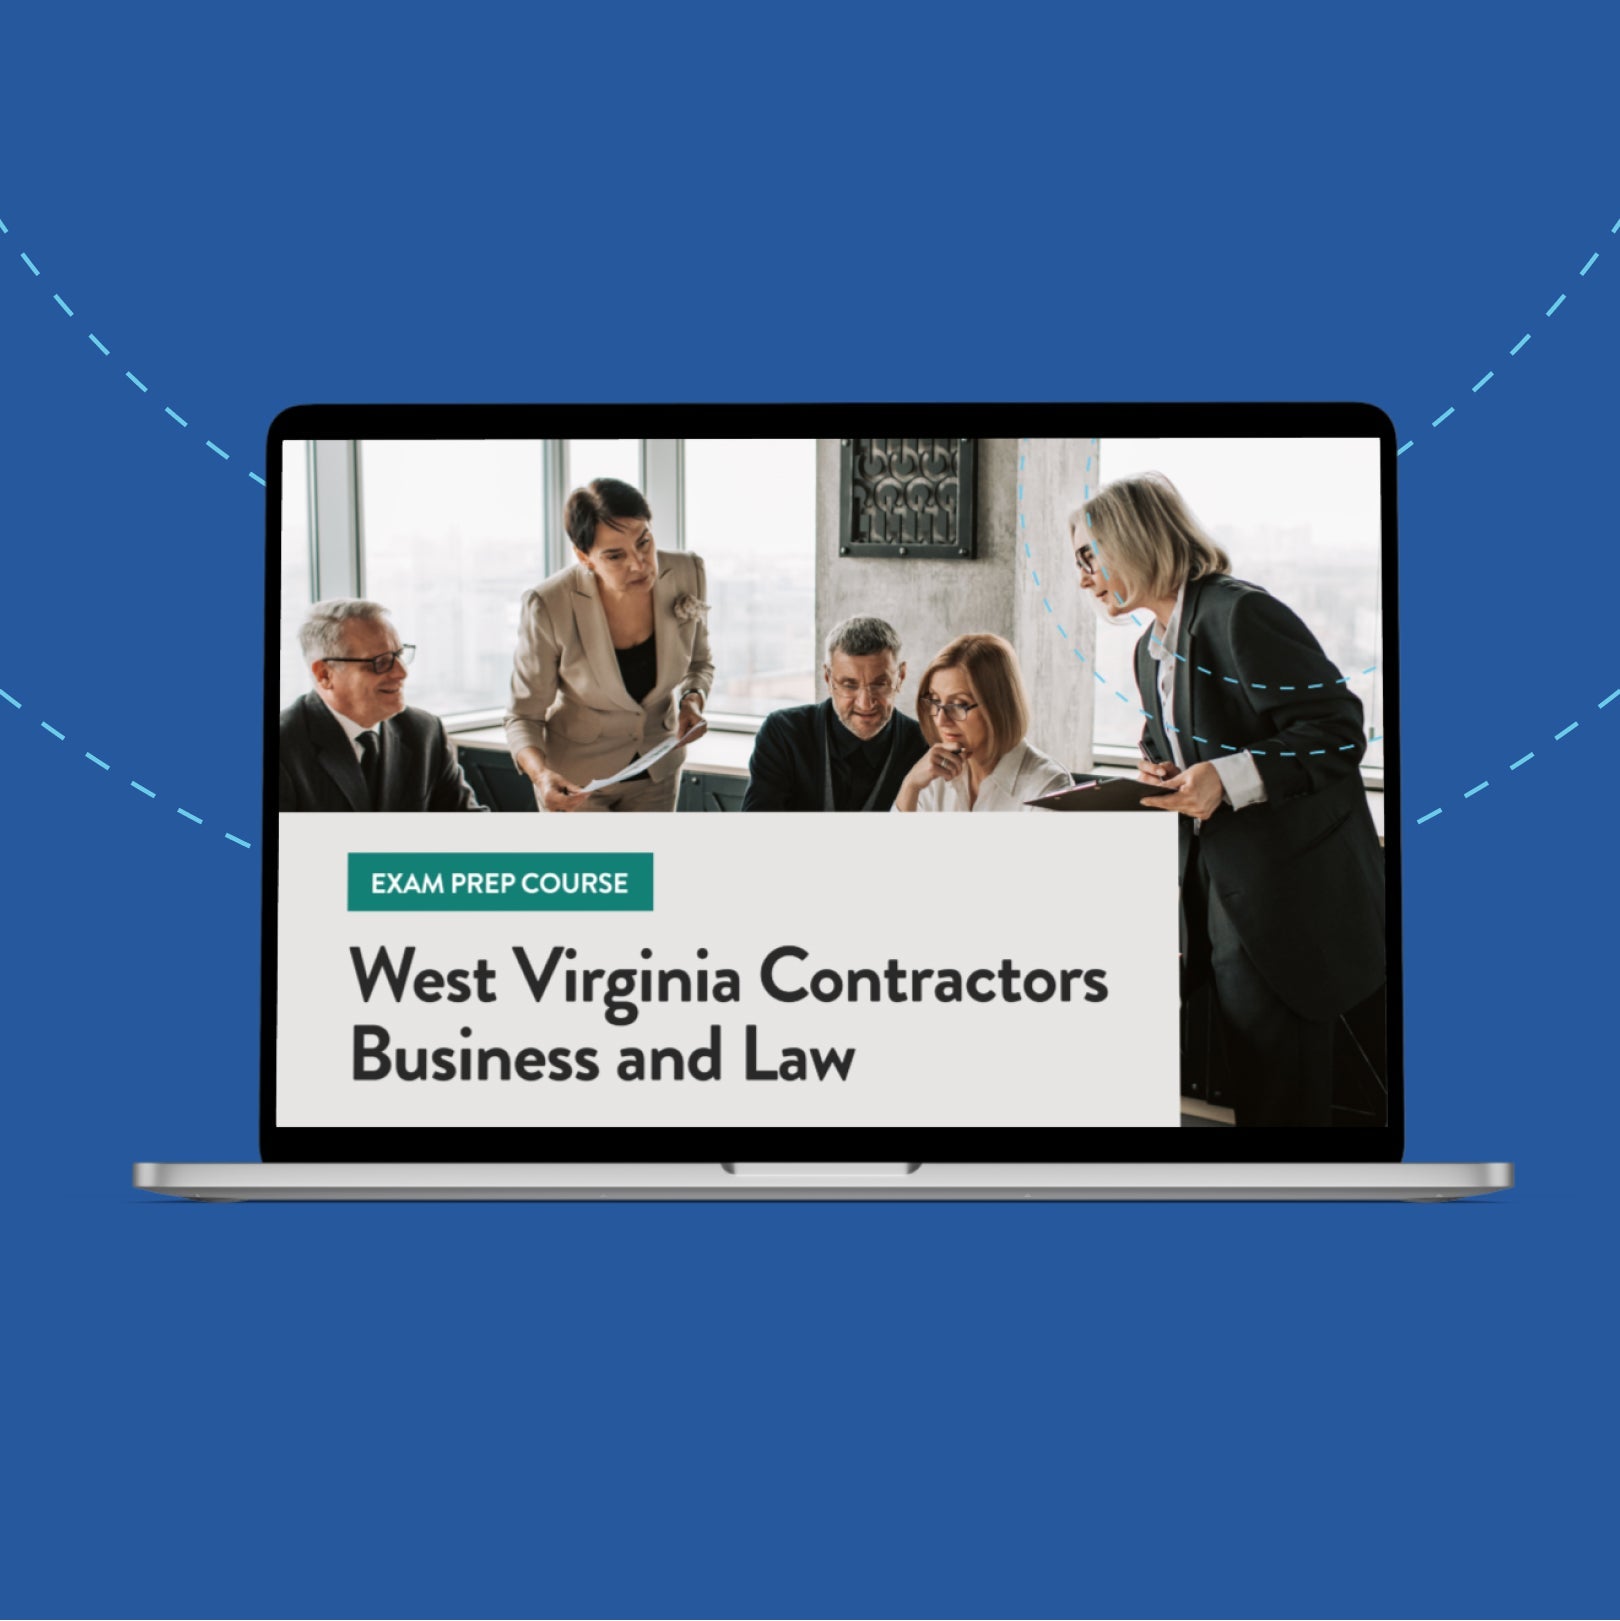 West Virginia Contractors Business and Law Exam Prep Course